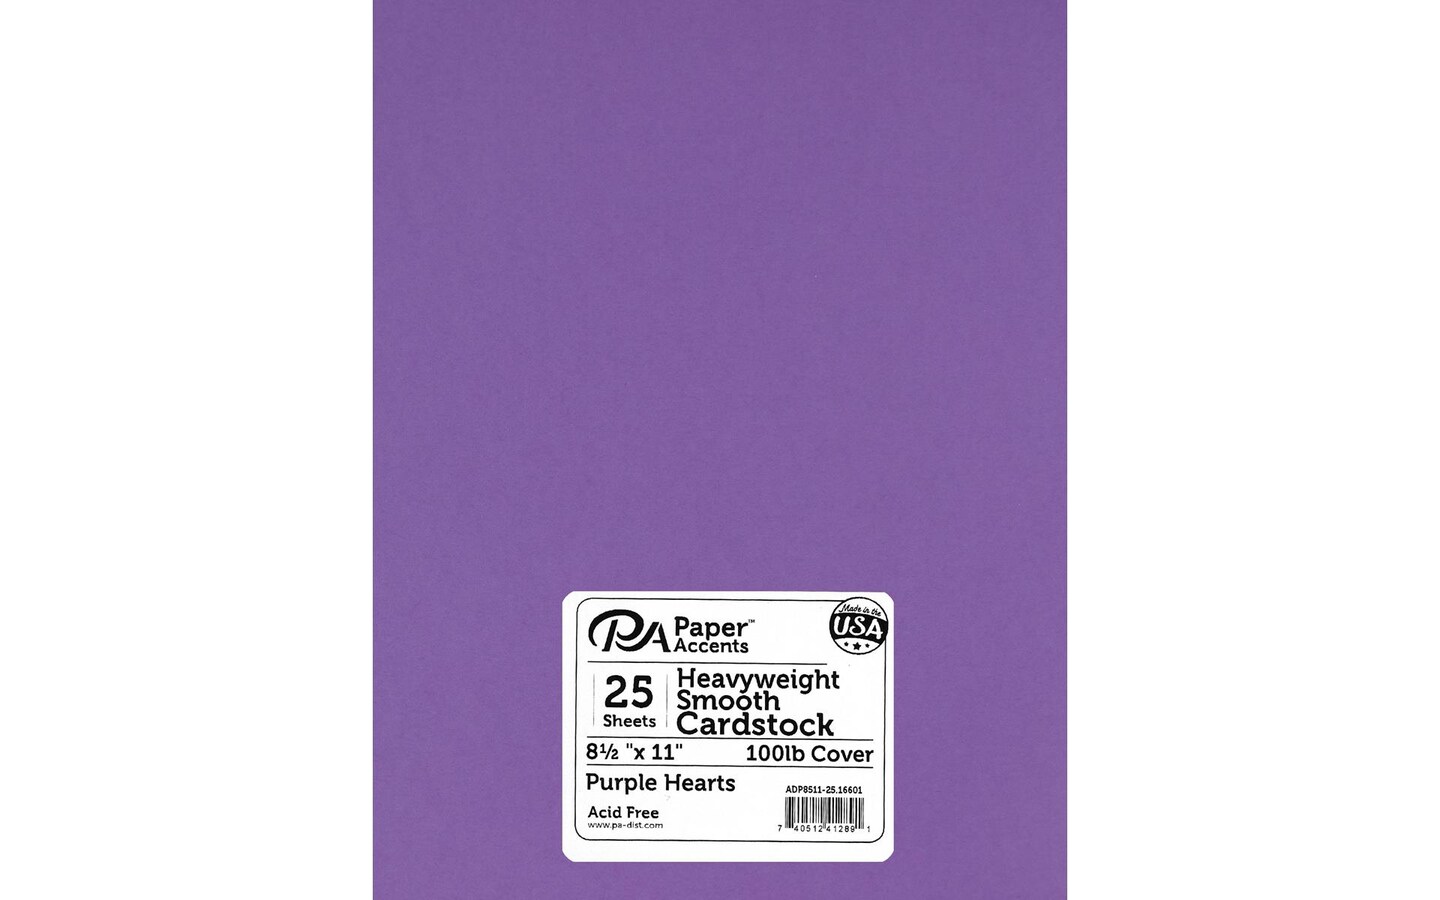 Buy in Bulk - PA Paper Accents Heavyweight Smooth Cardstock 8.5